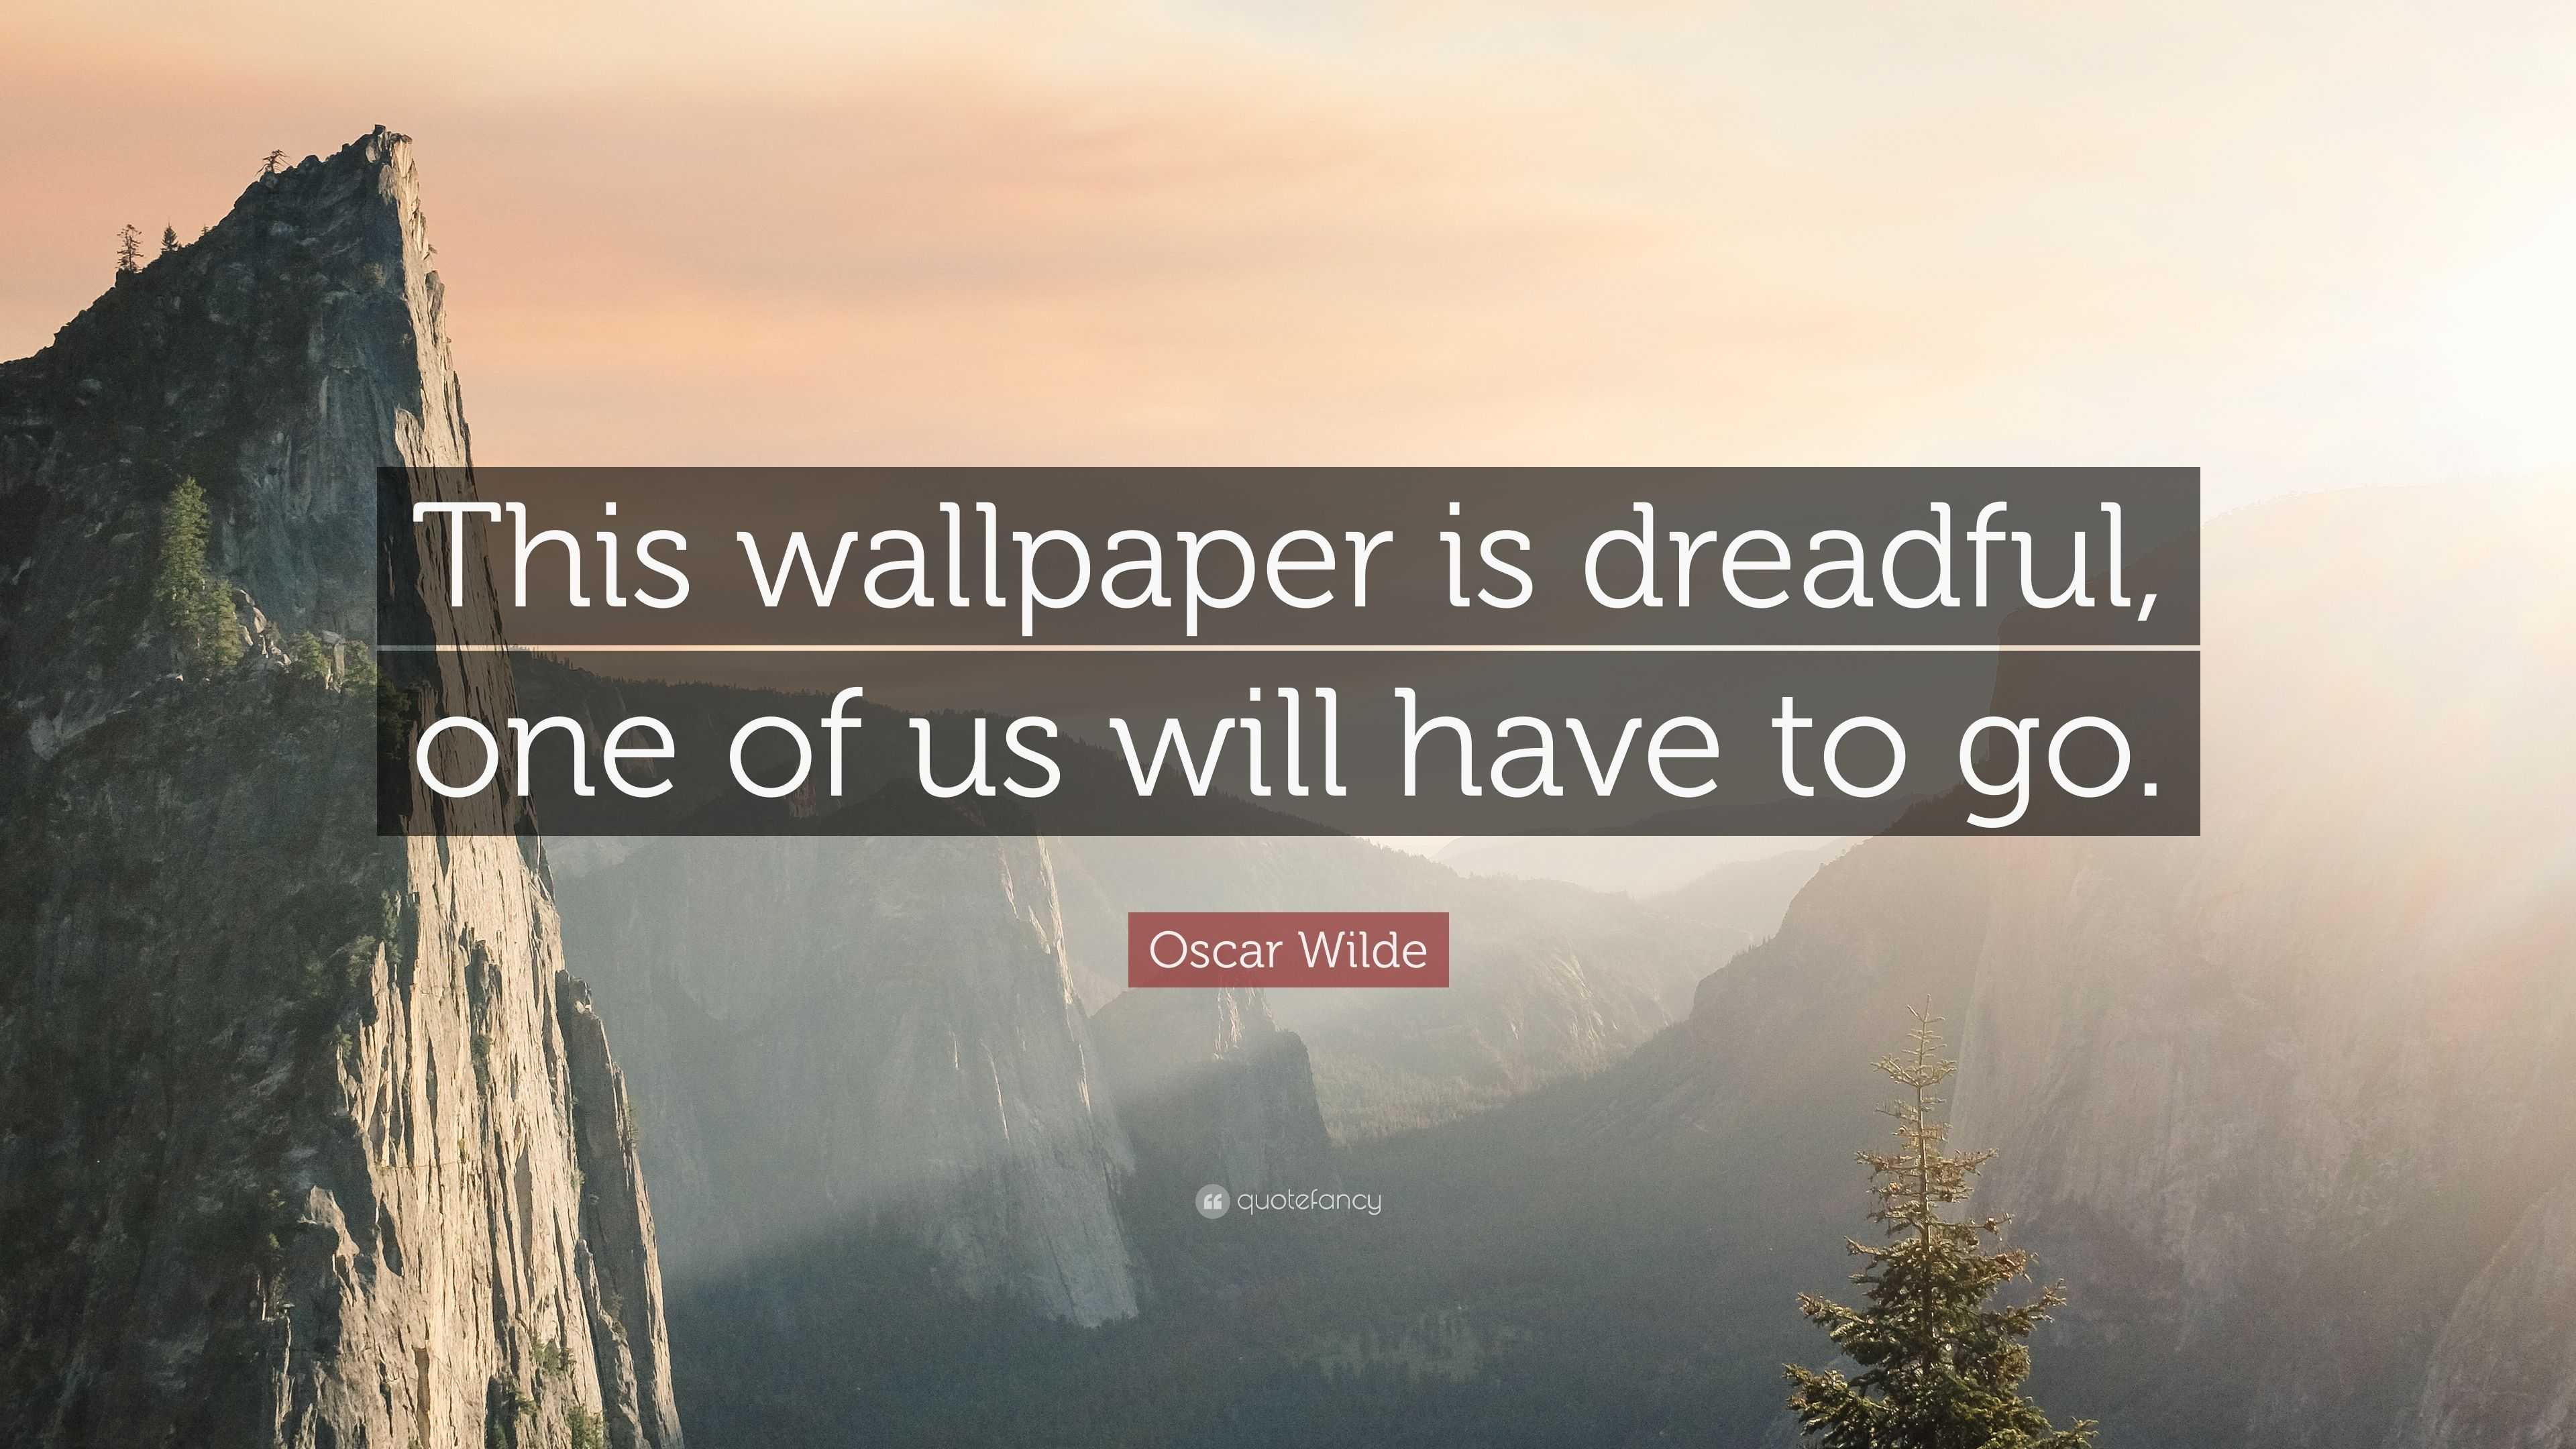 Oscar Wilde Quote: “This wallpaper is dreadful, one of us will have to go.”